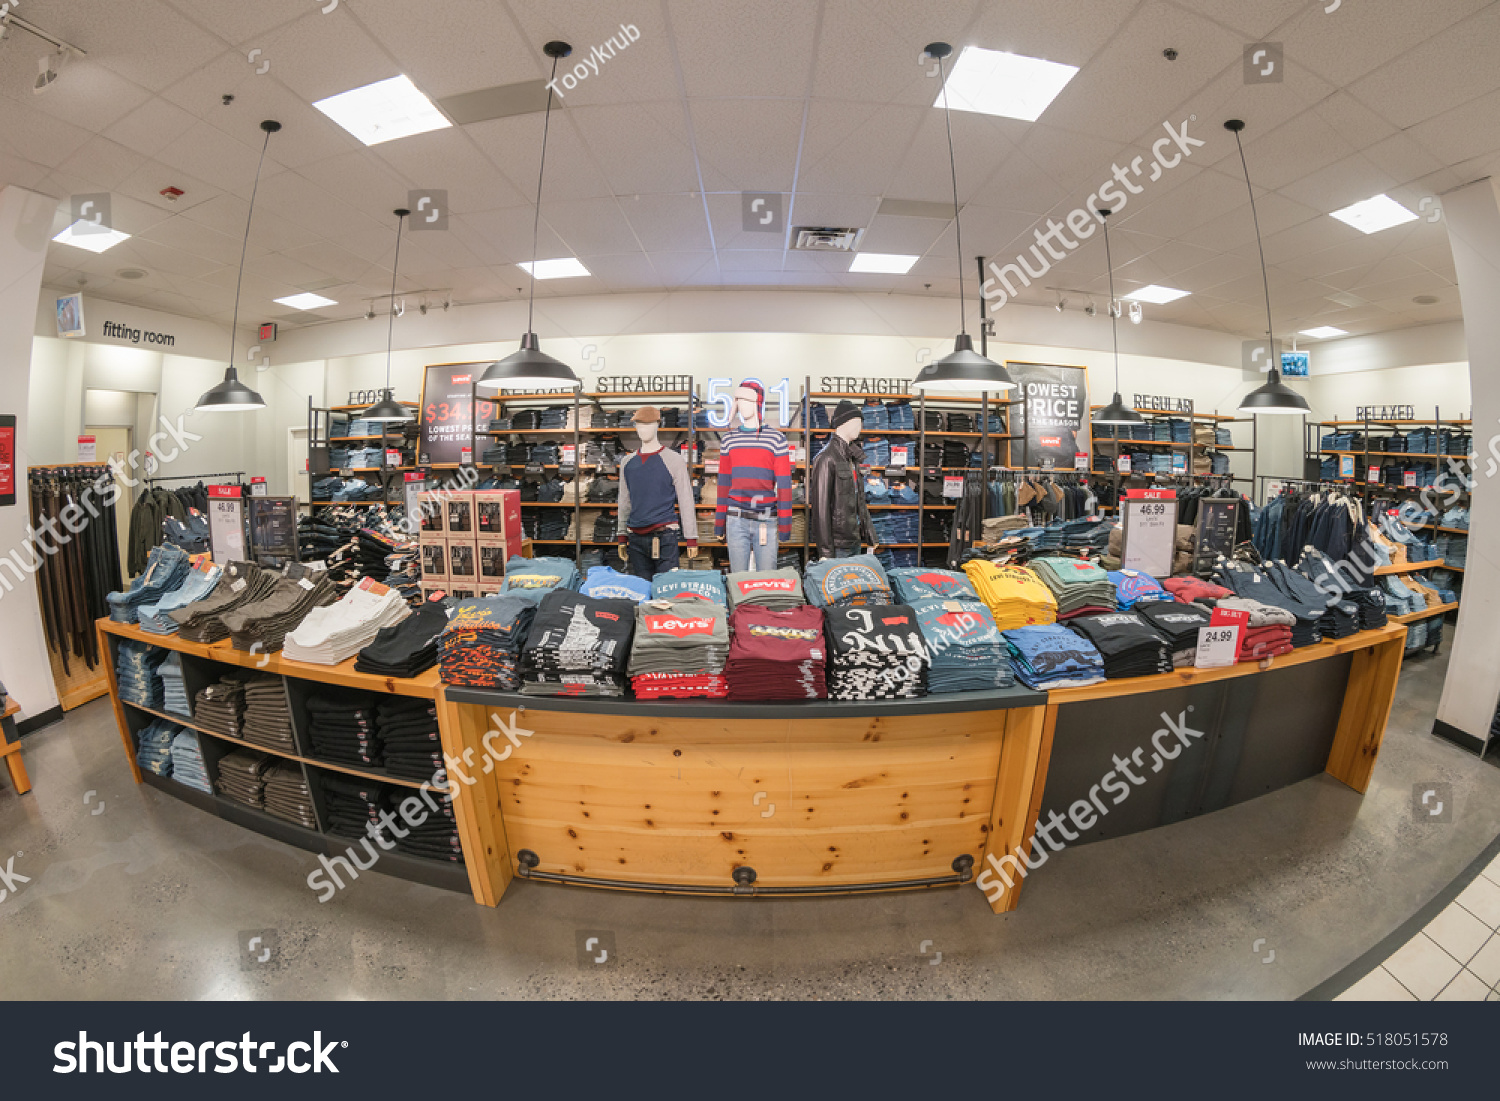 levi's queens center mall OFF 77 